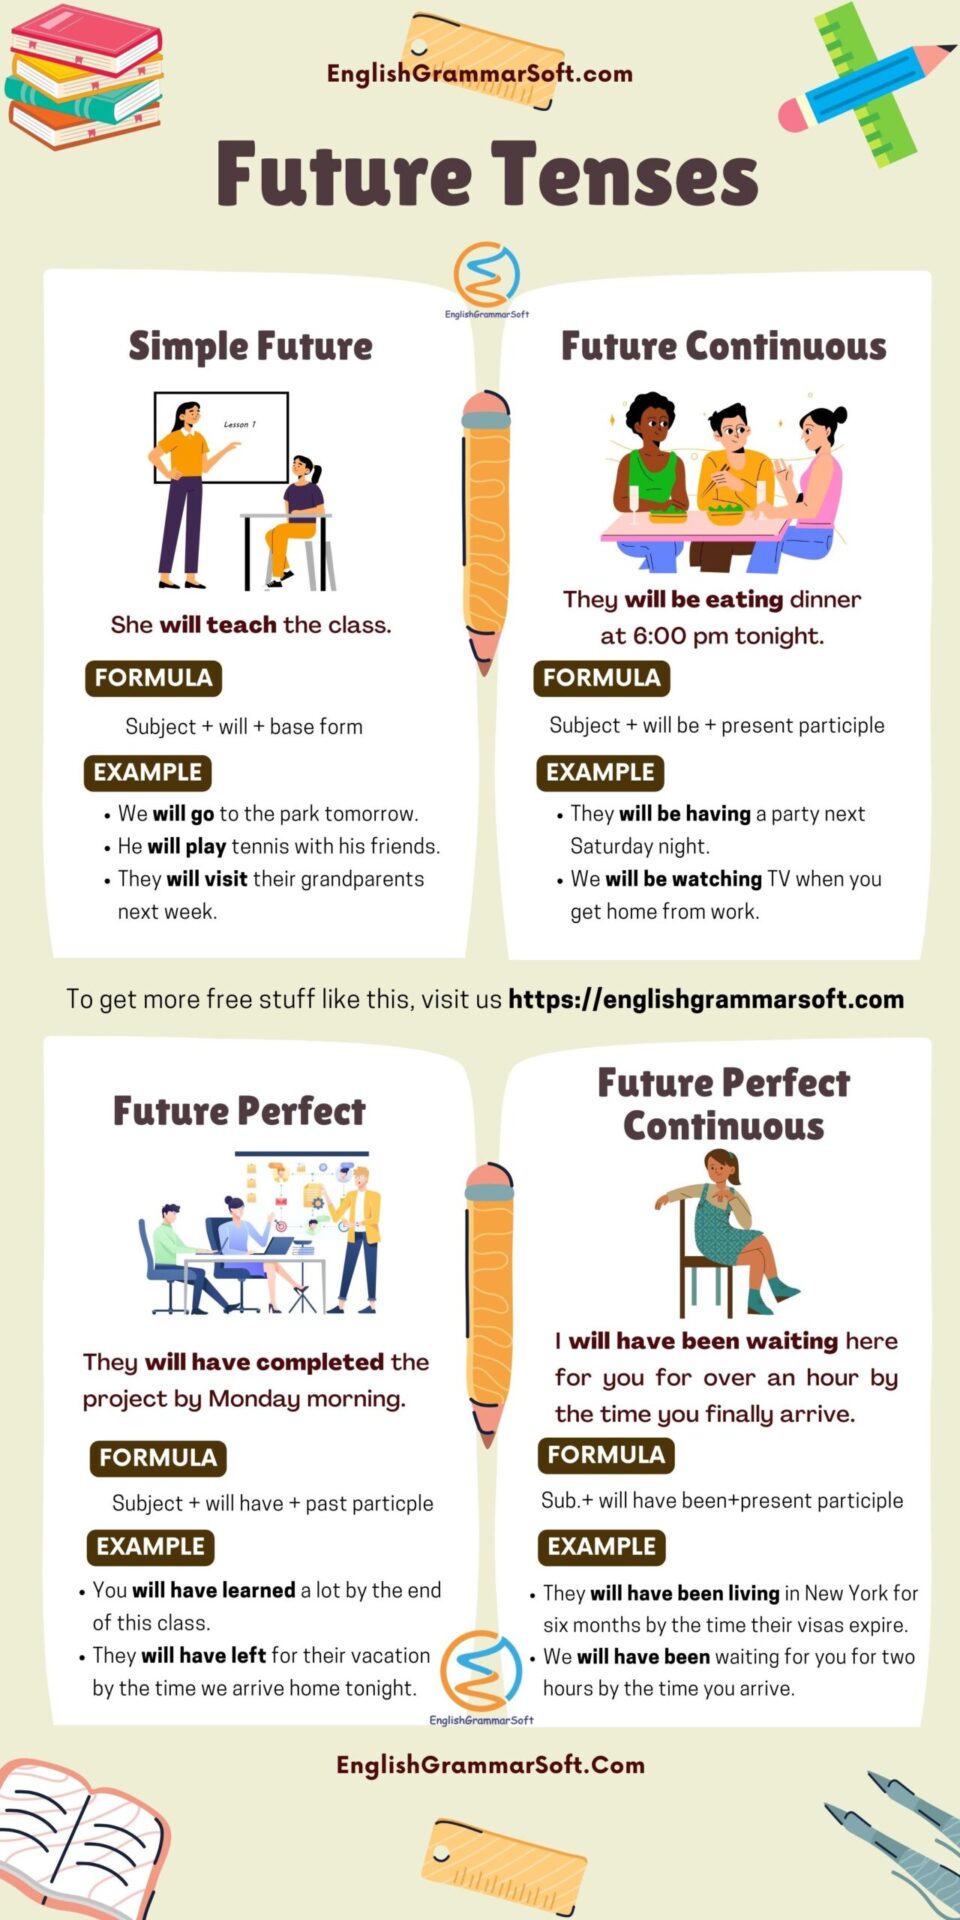 Future Tenses in English (Formula and Examples)